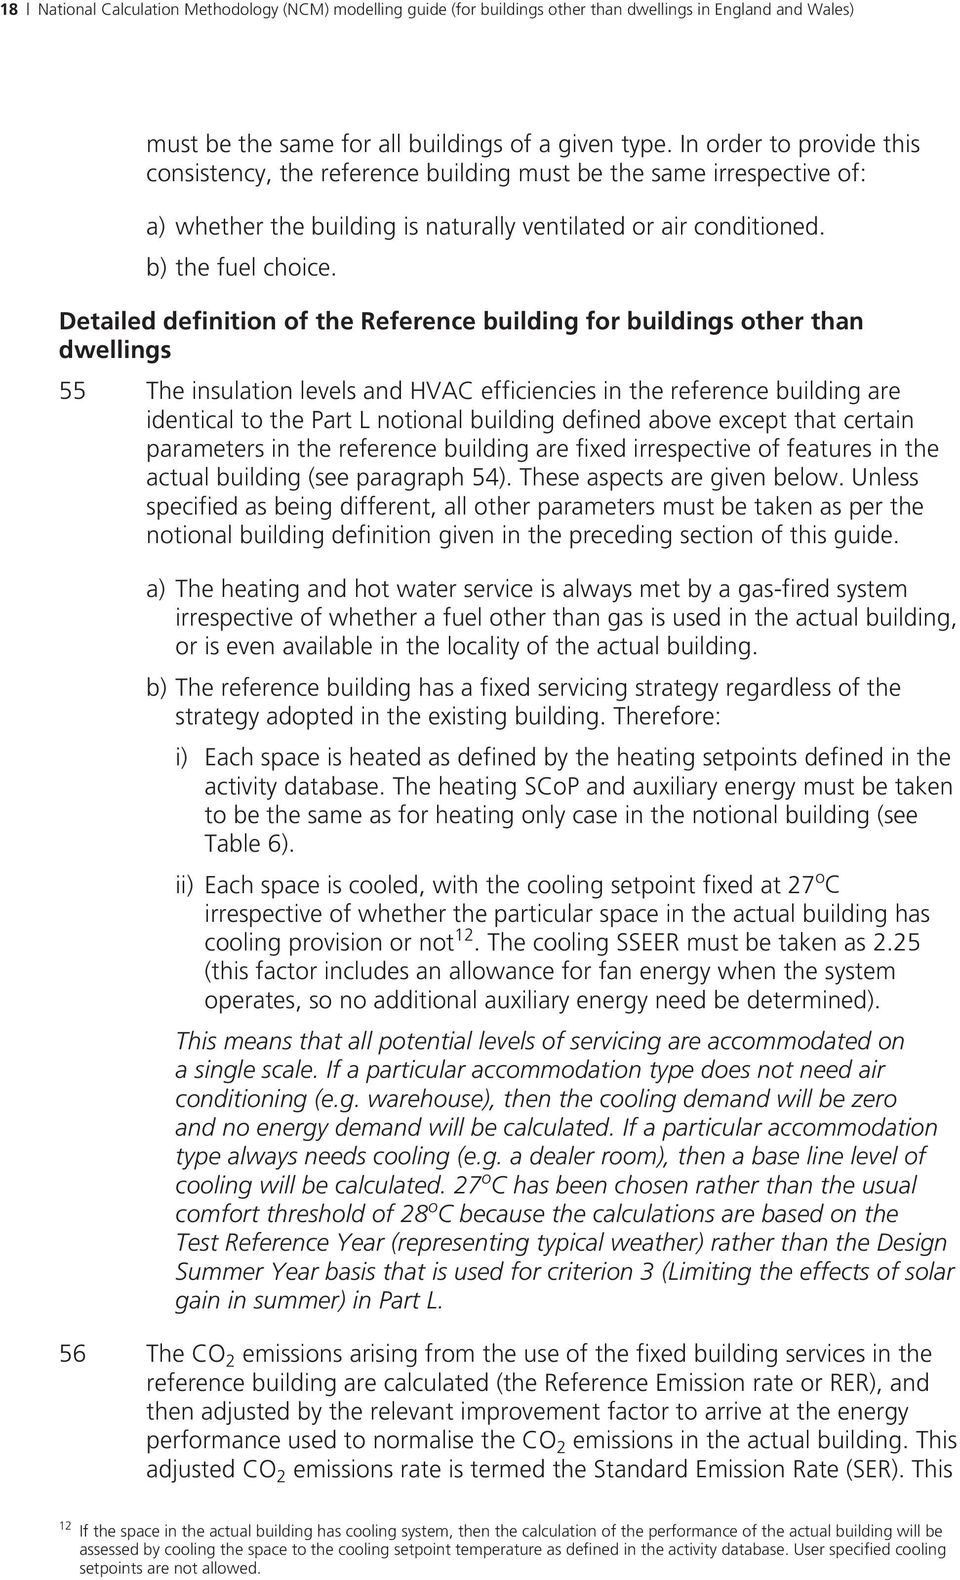 Detailed definition of the Reference building for buildings other than dwellings 55 The insulation levels and HVAC efficiencies in the reference building are identical to the Part L notional building